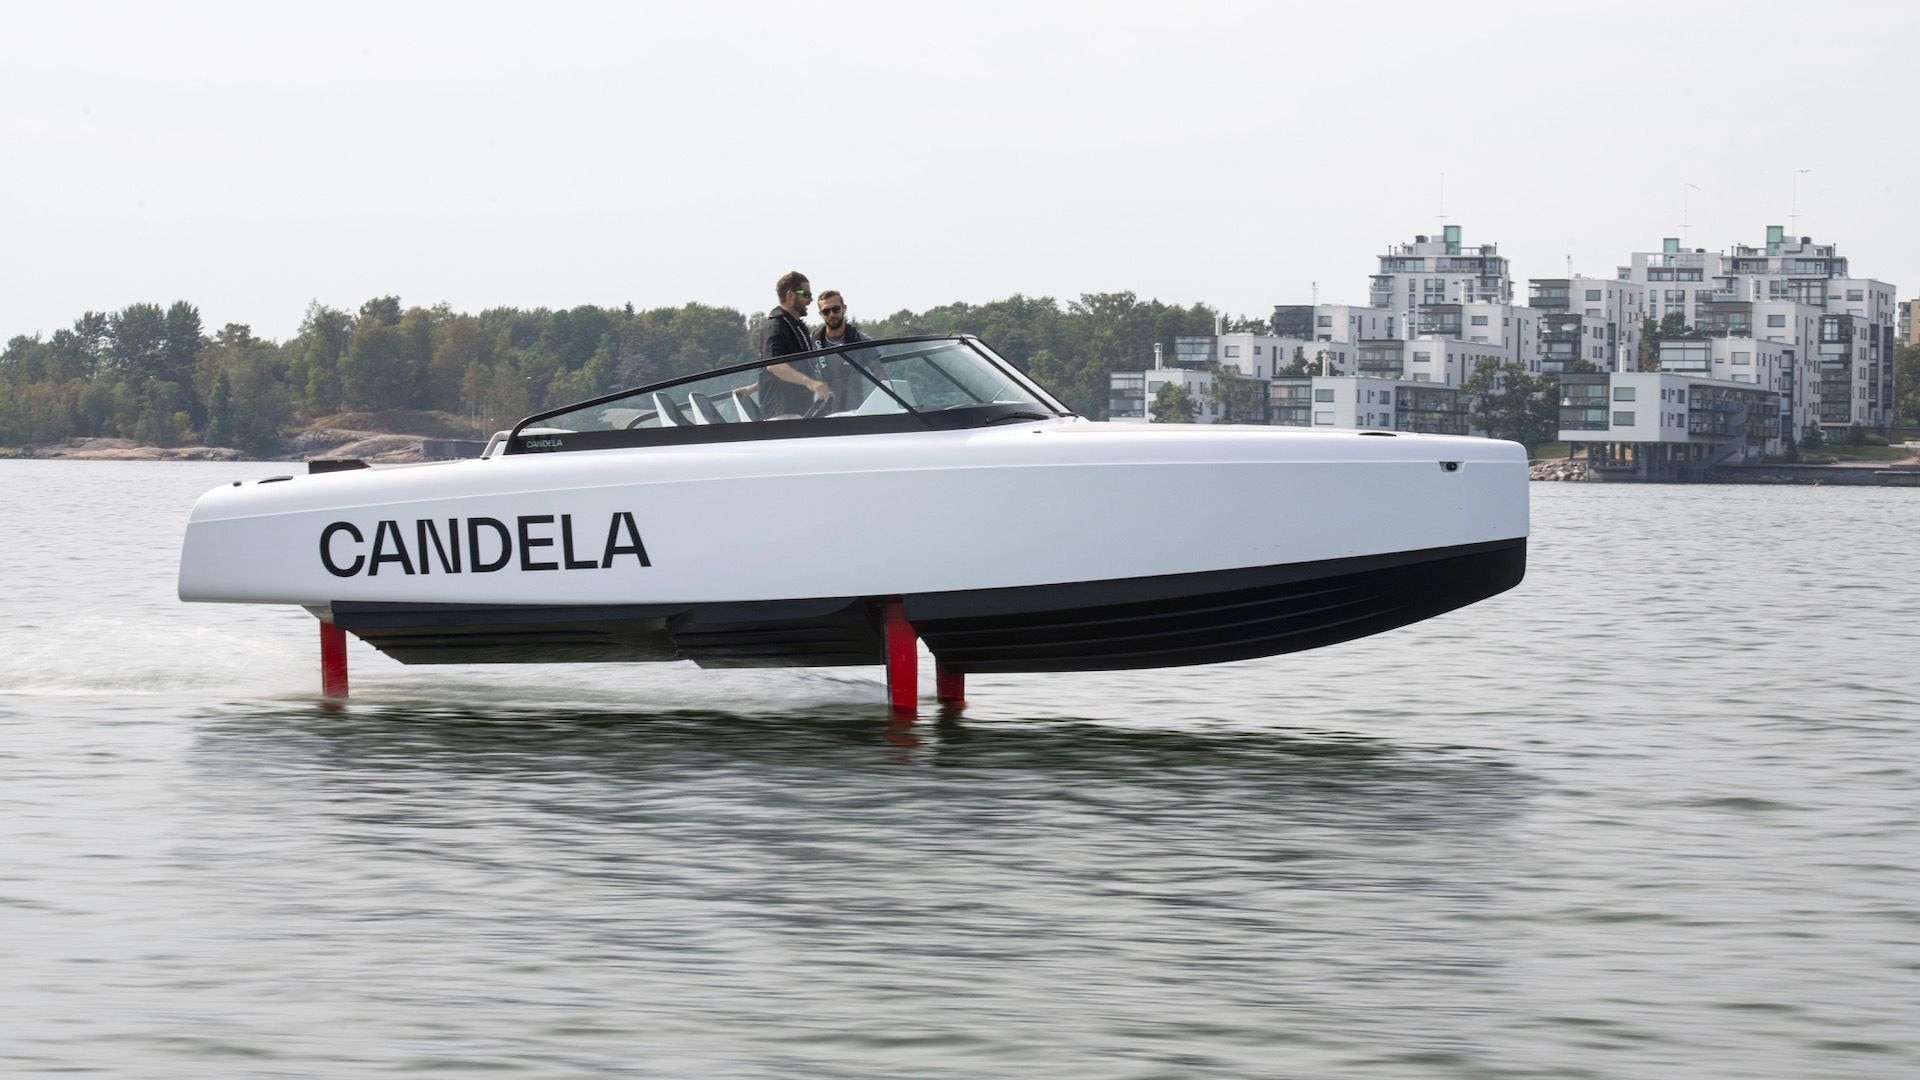 Polestar agrees to supply batteries and charging tech to boat company  Candela